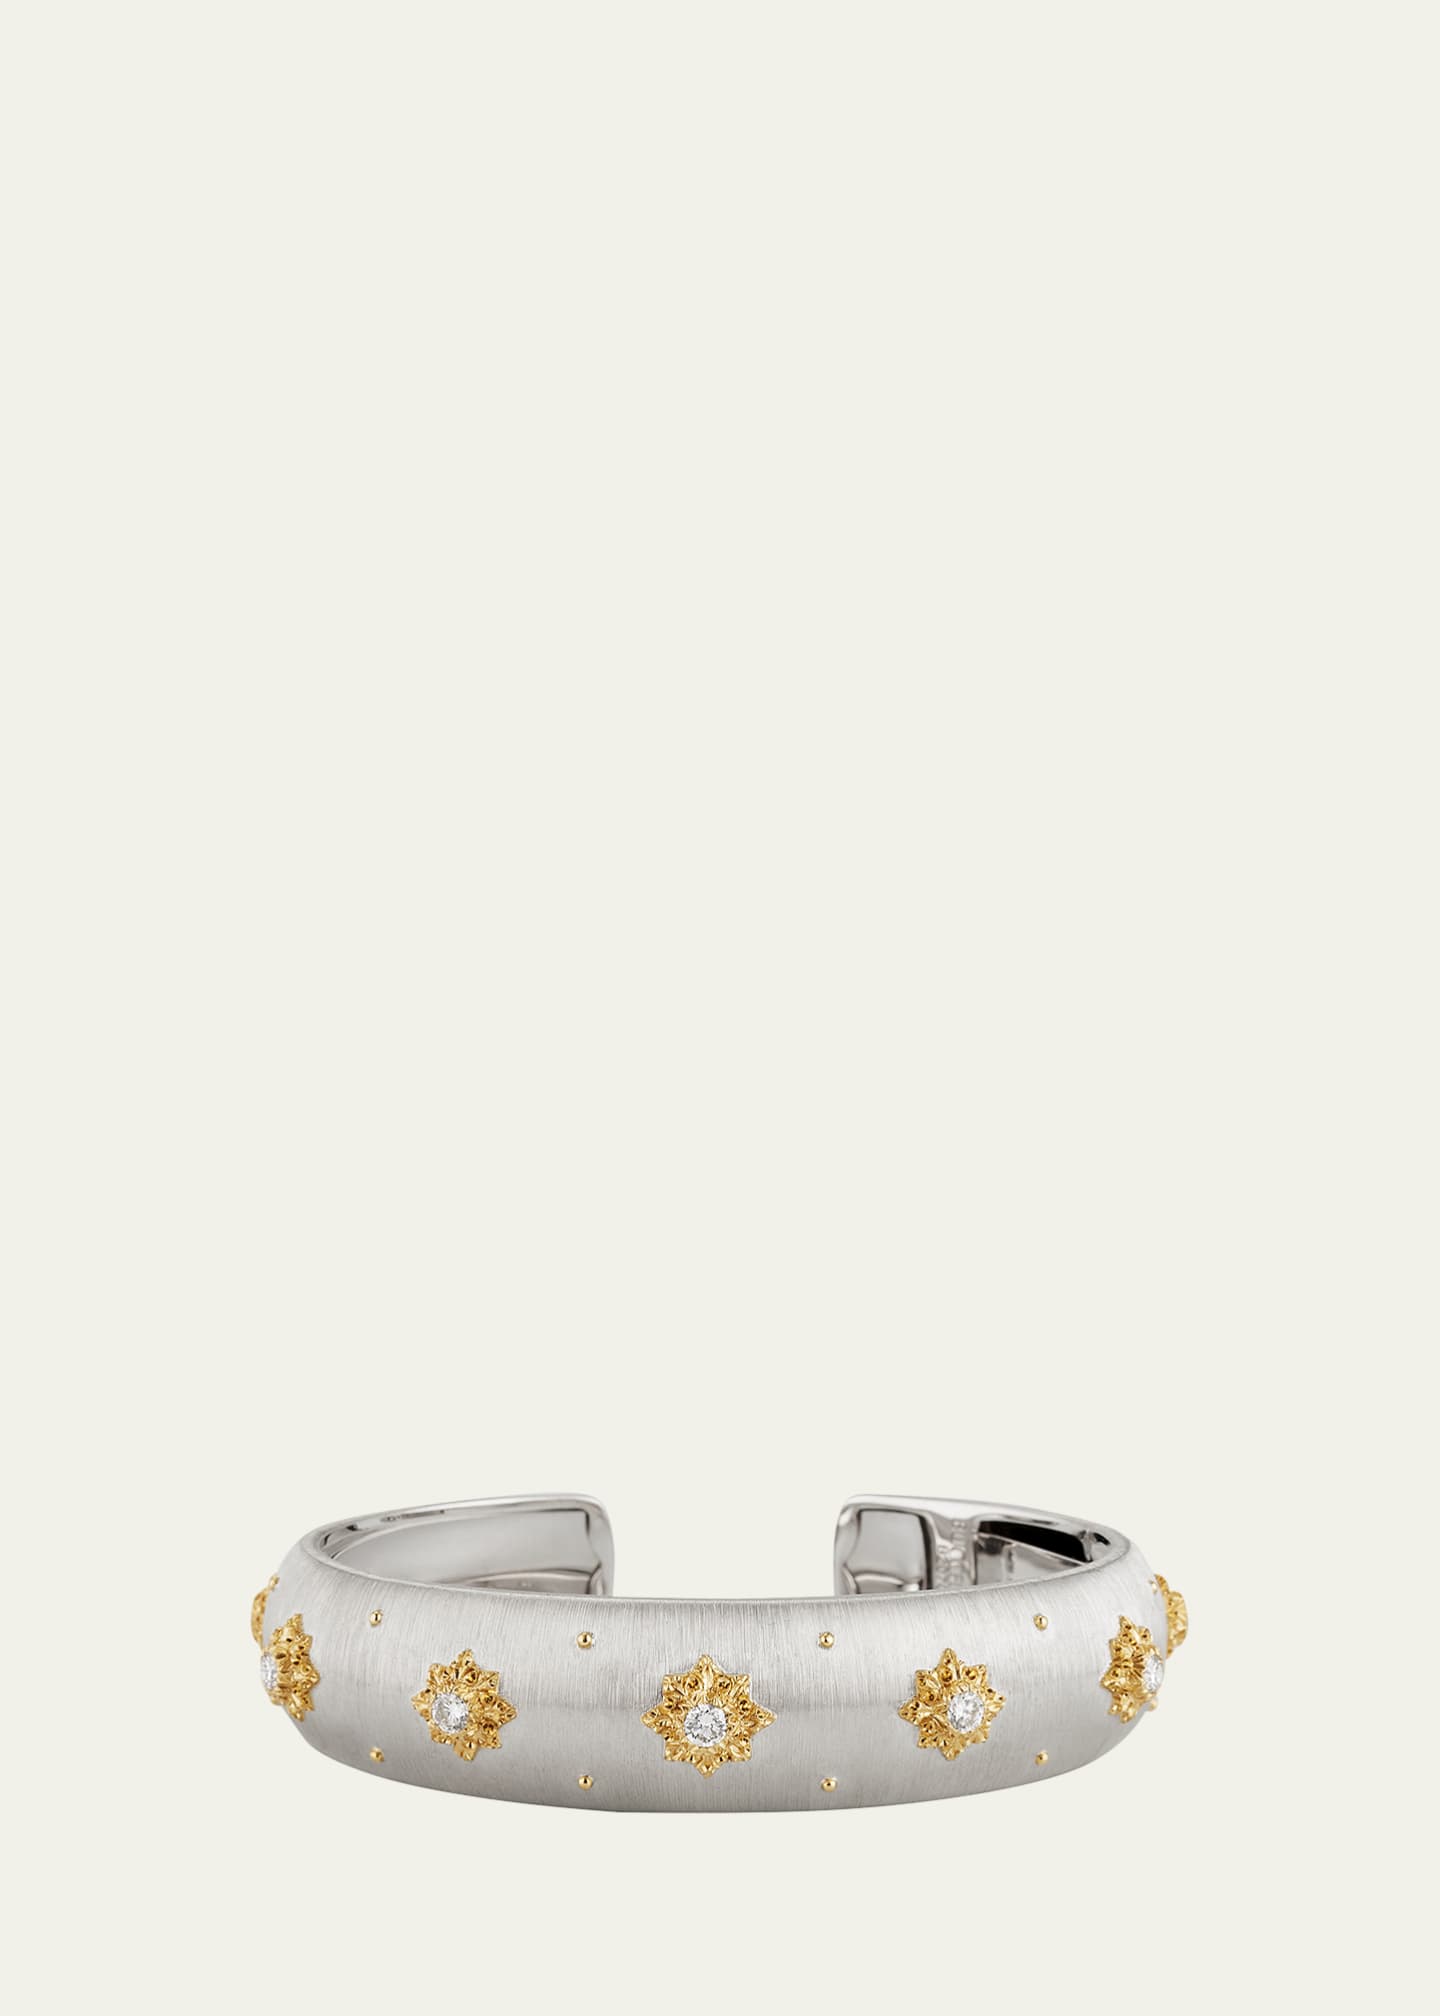 Buccellati Gold And Diamond Cuff Bracelet Available For Immediate